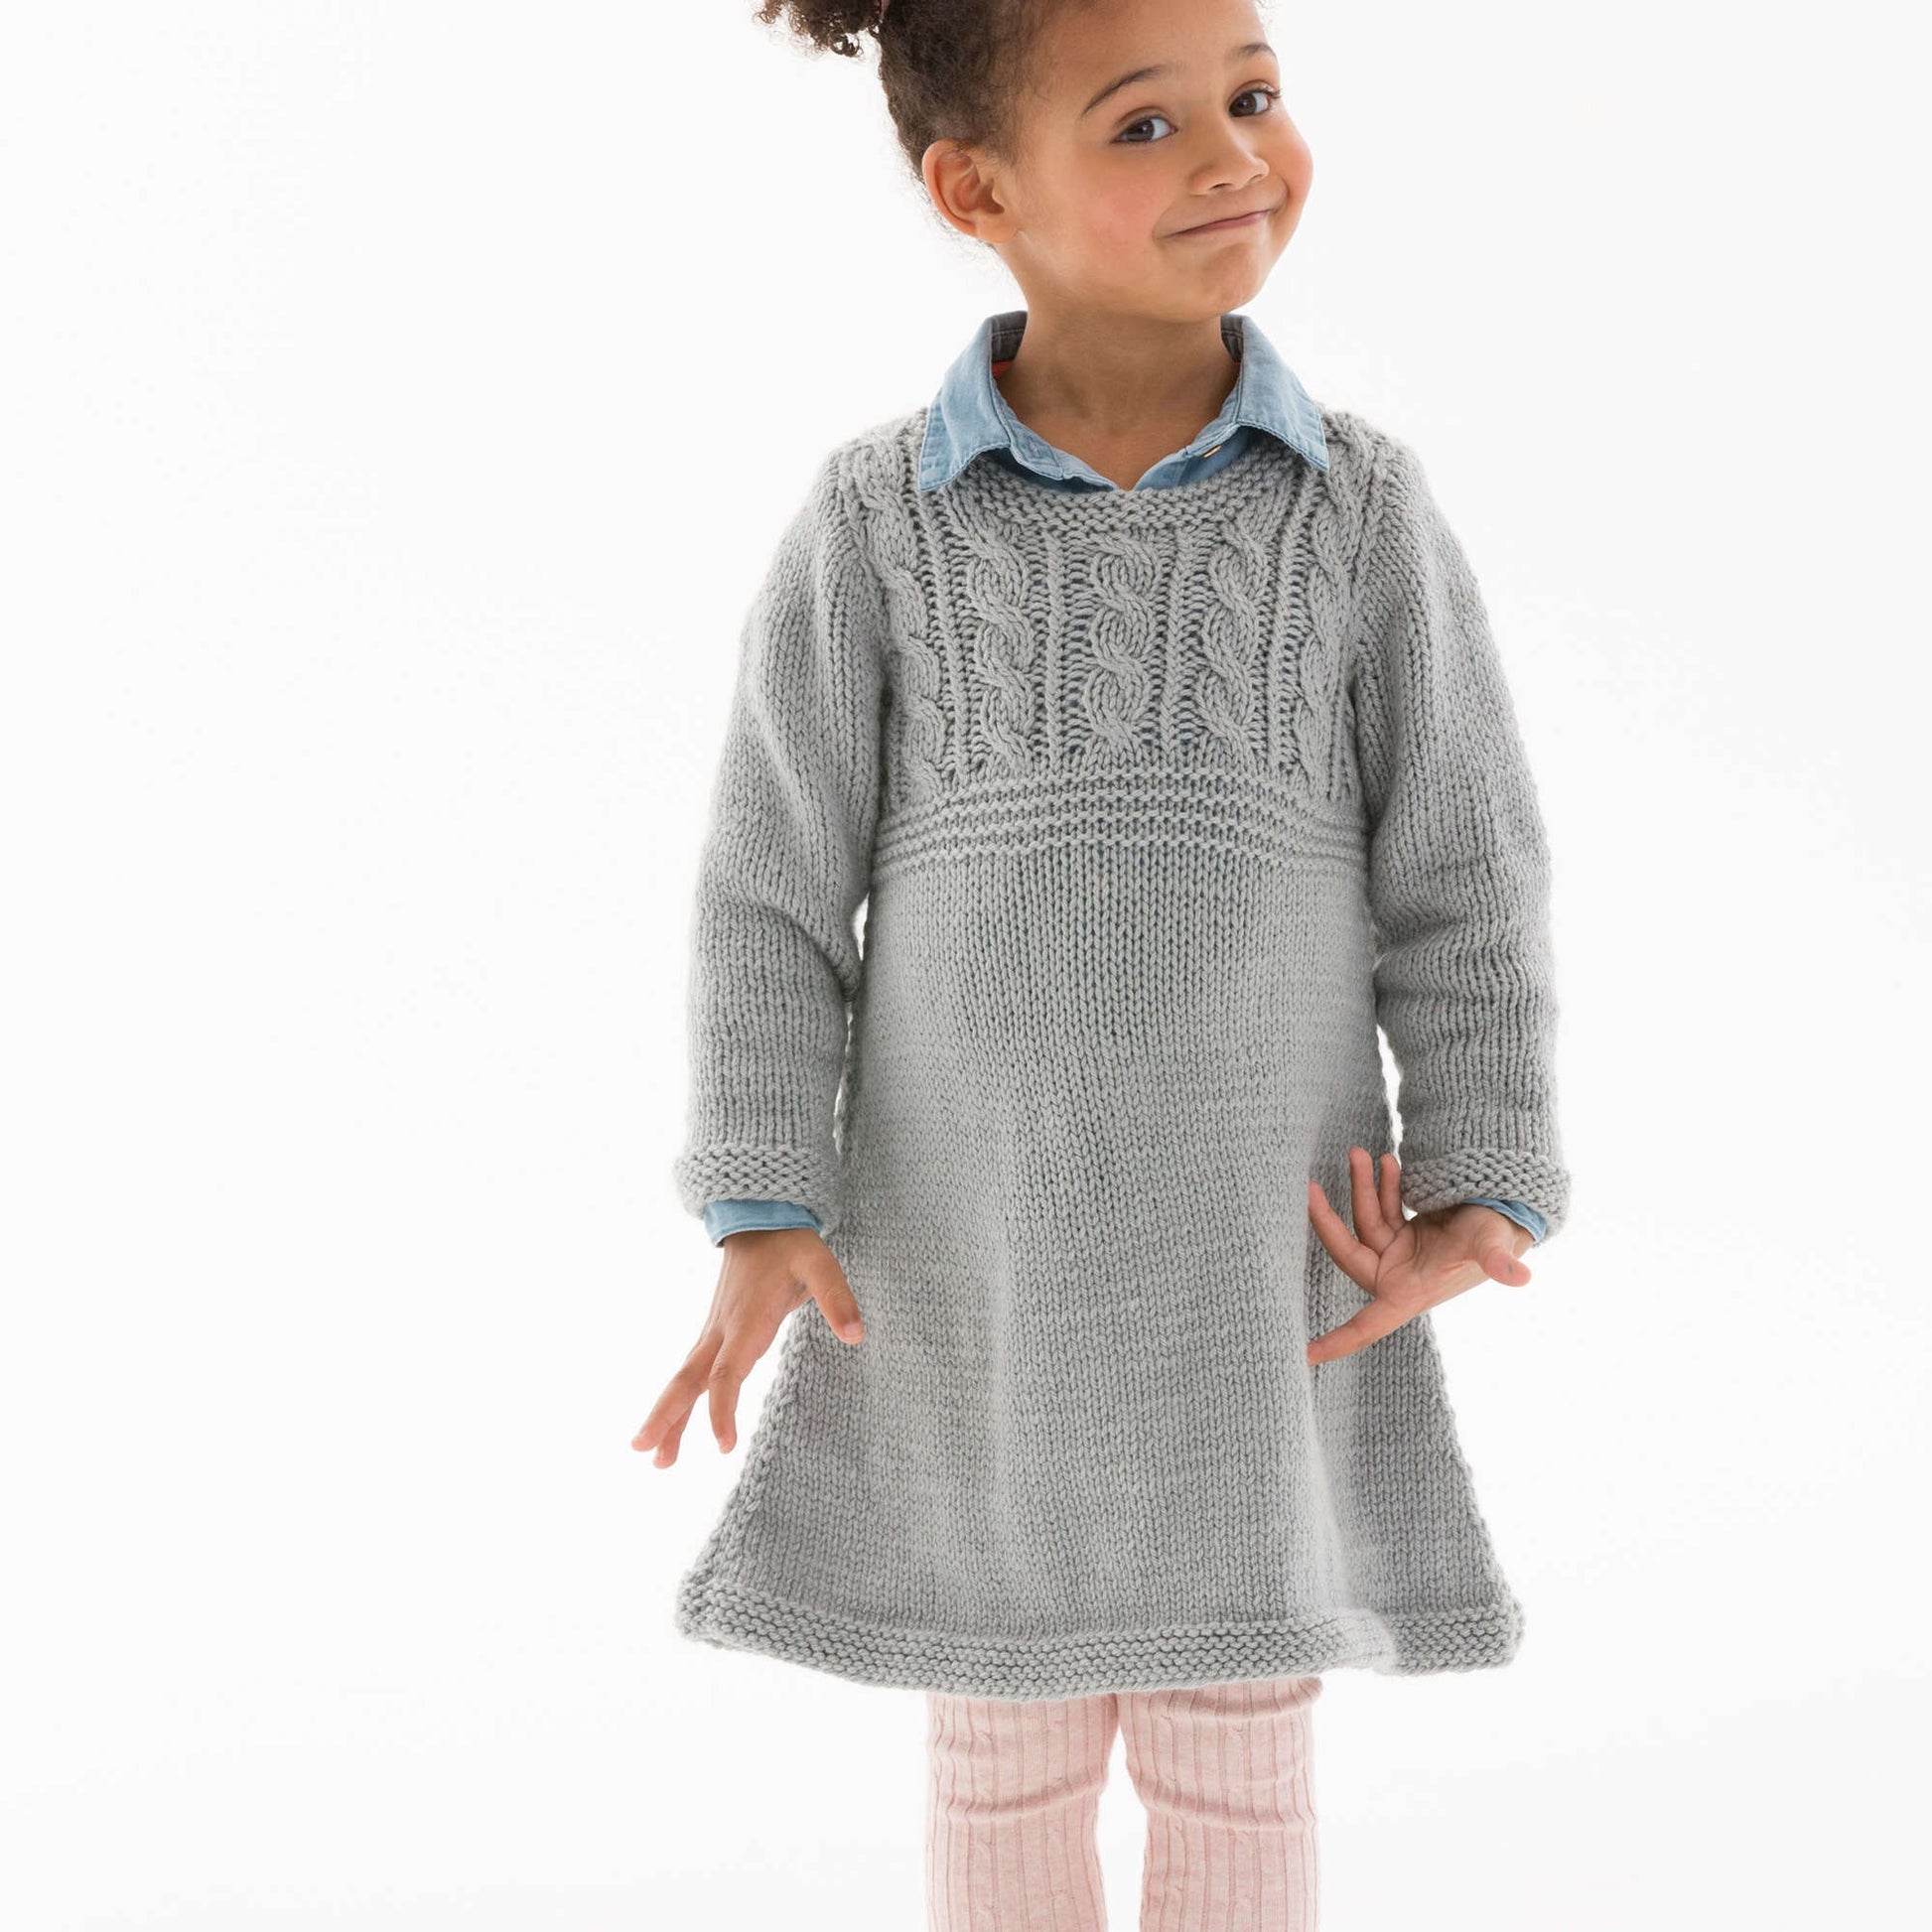 Free Red Heart Cable Sweater Dress Knit Pattern